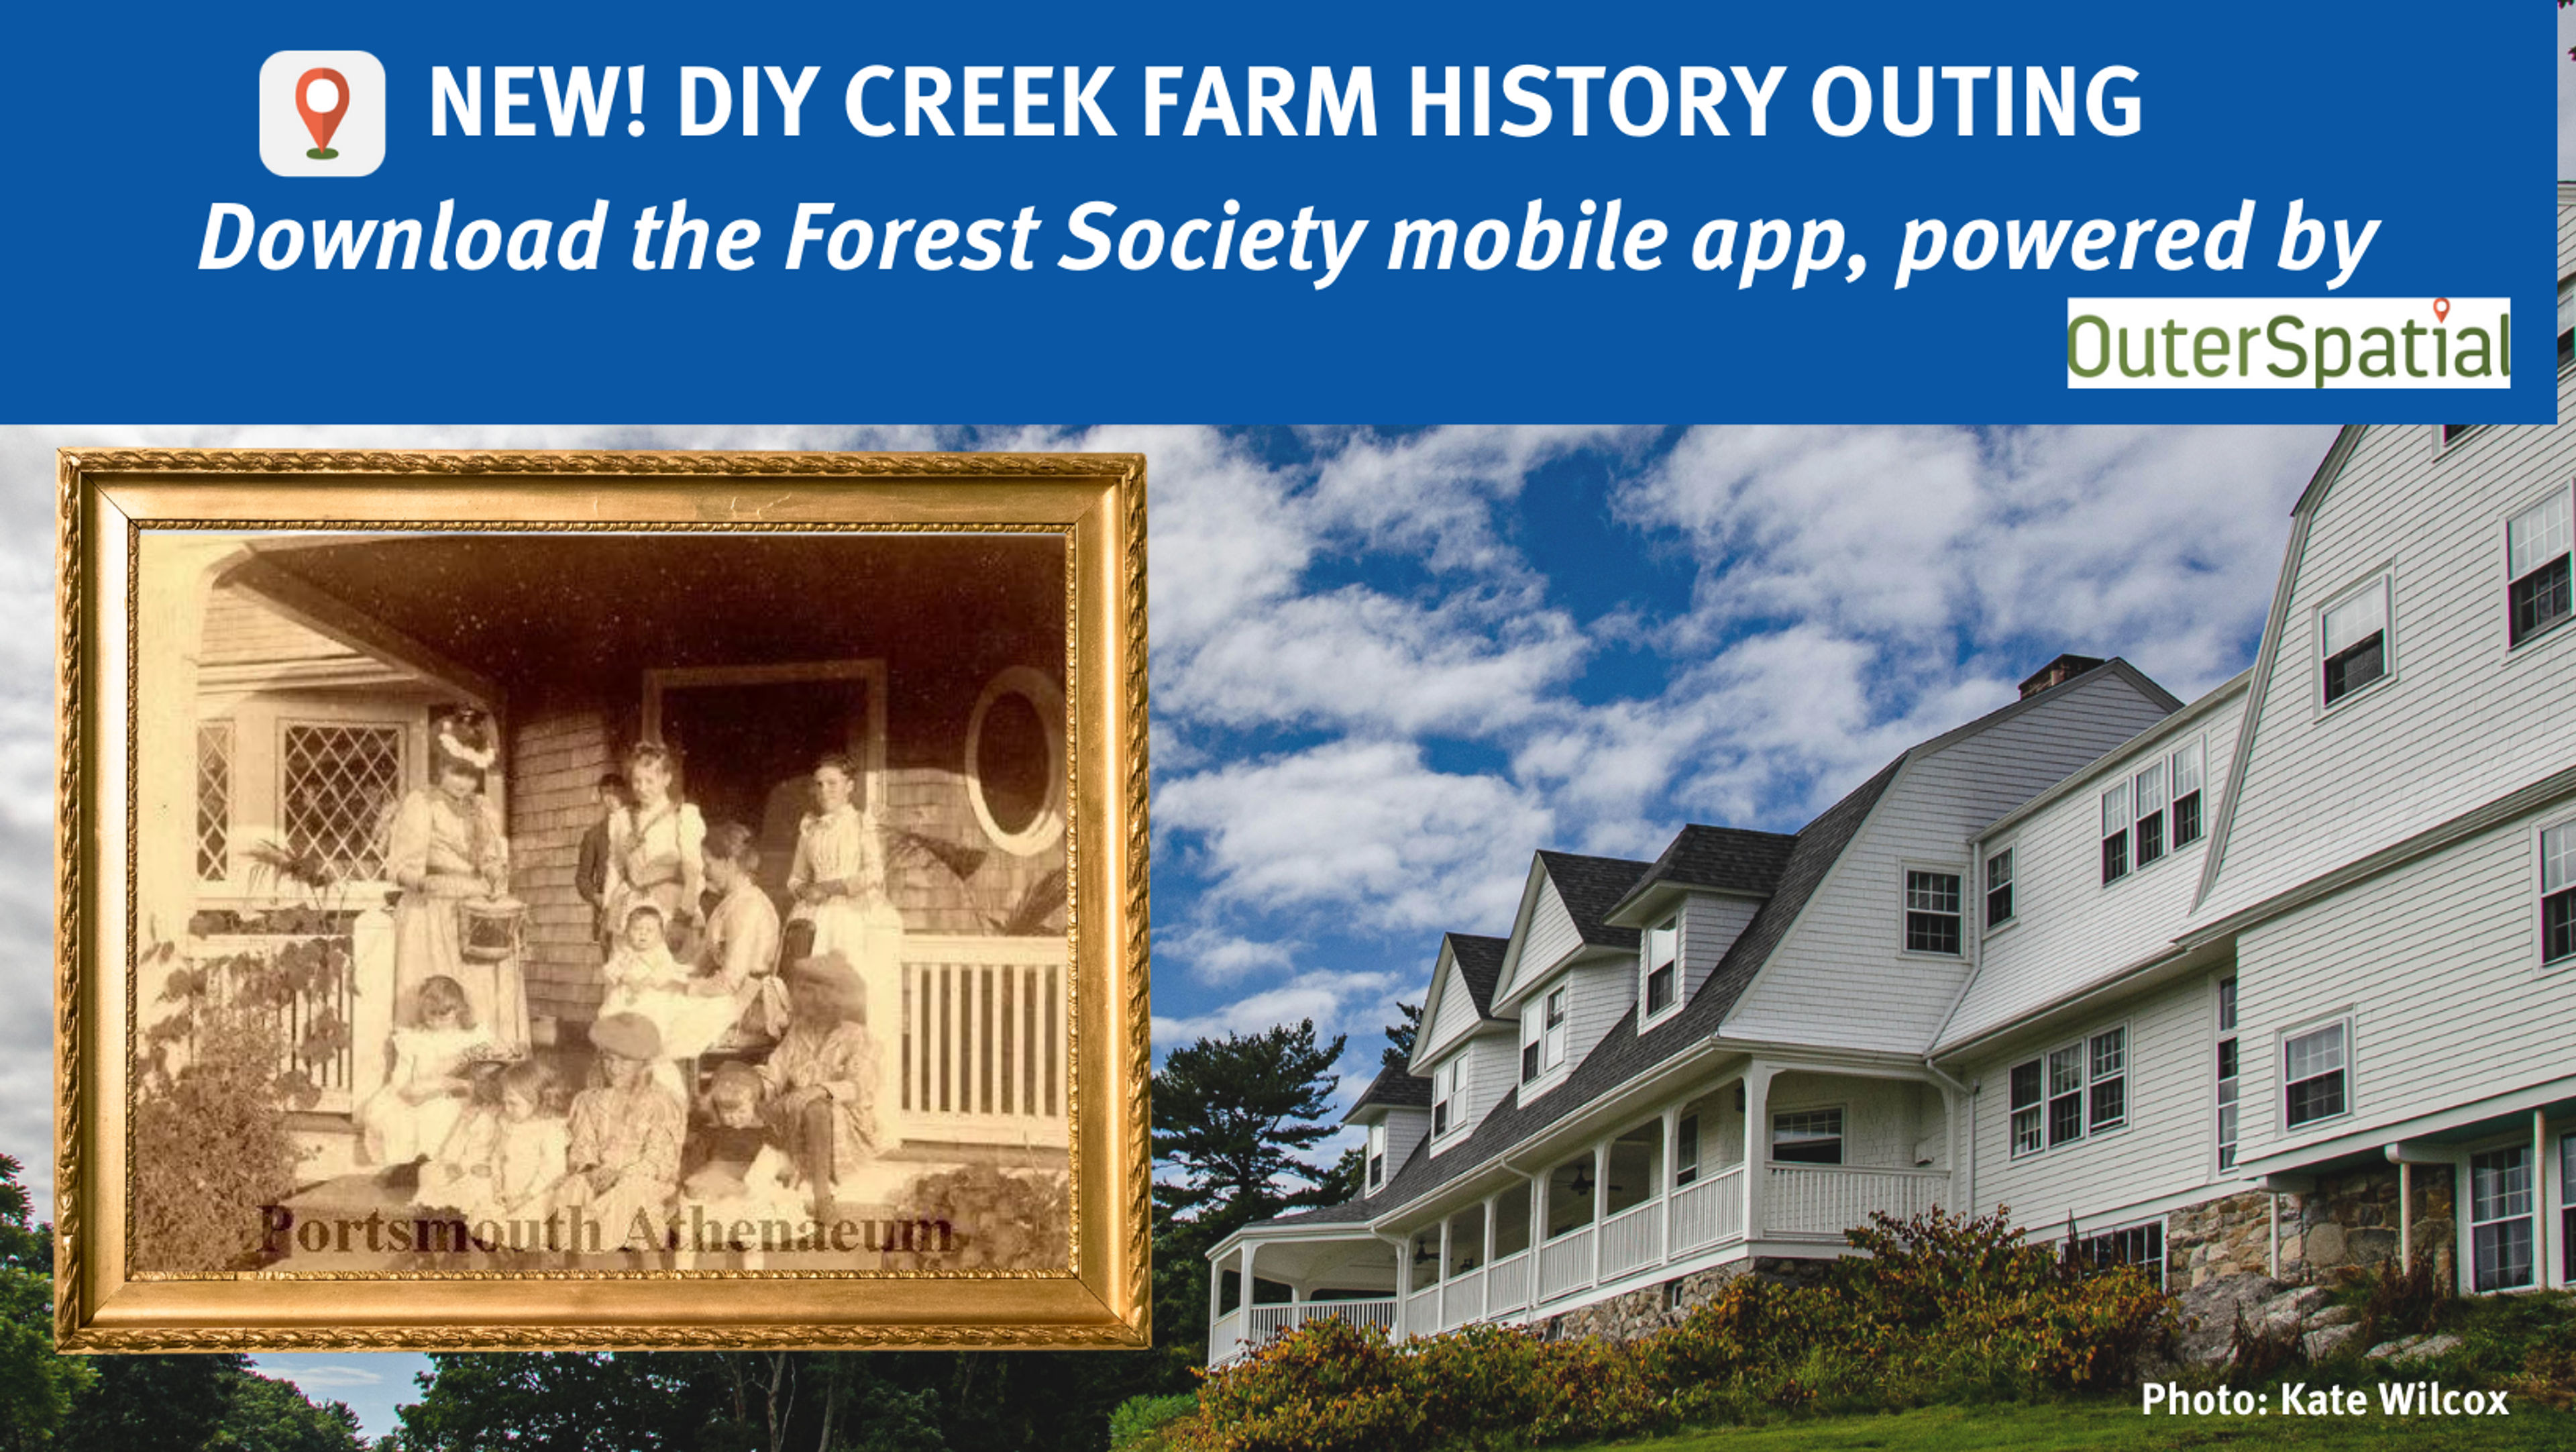 NEW! DIY Creek Farm History Outing advertisement with a historic photo of Carey Cottage.